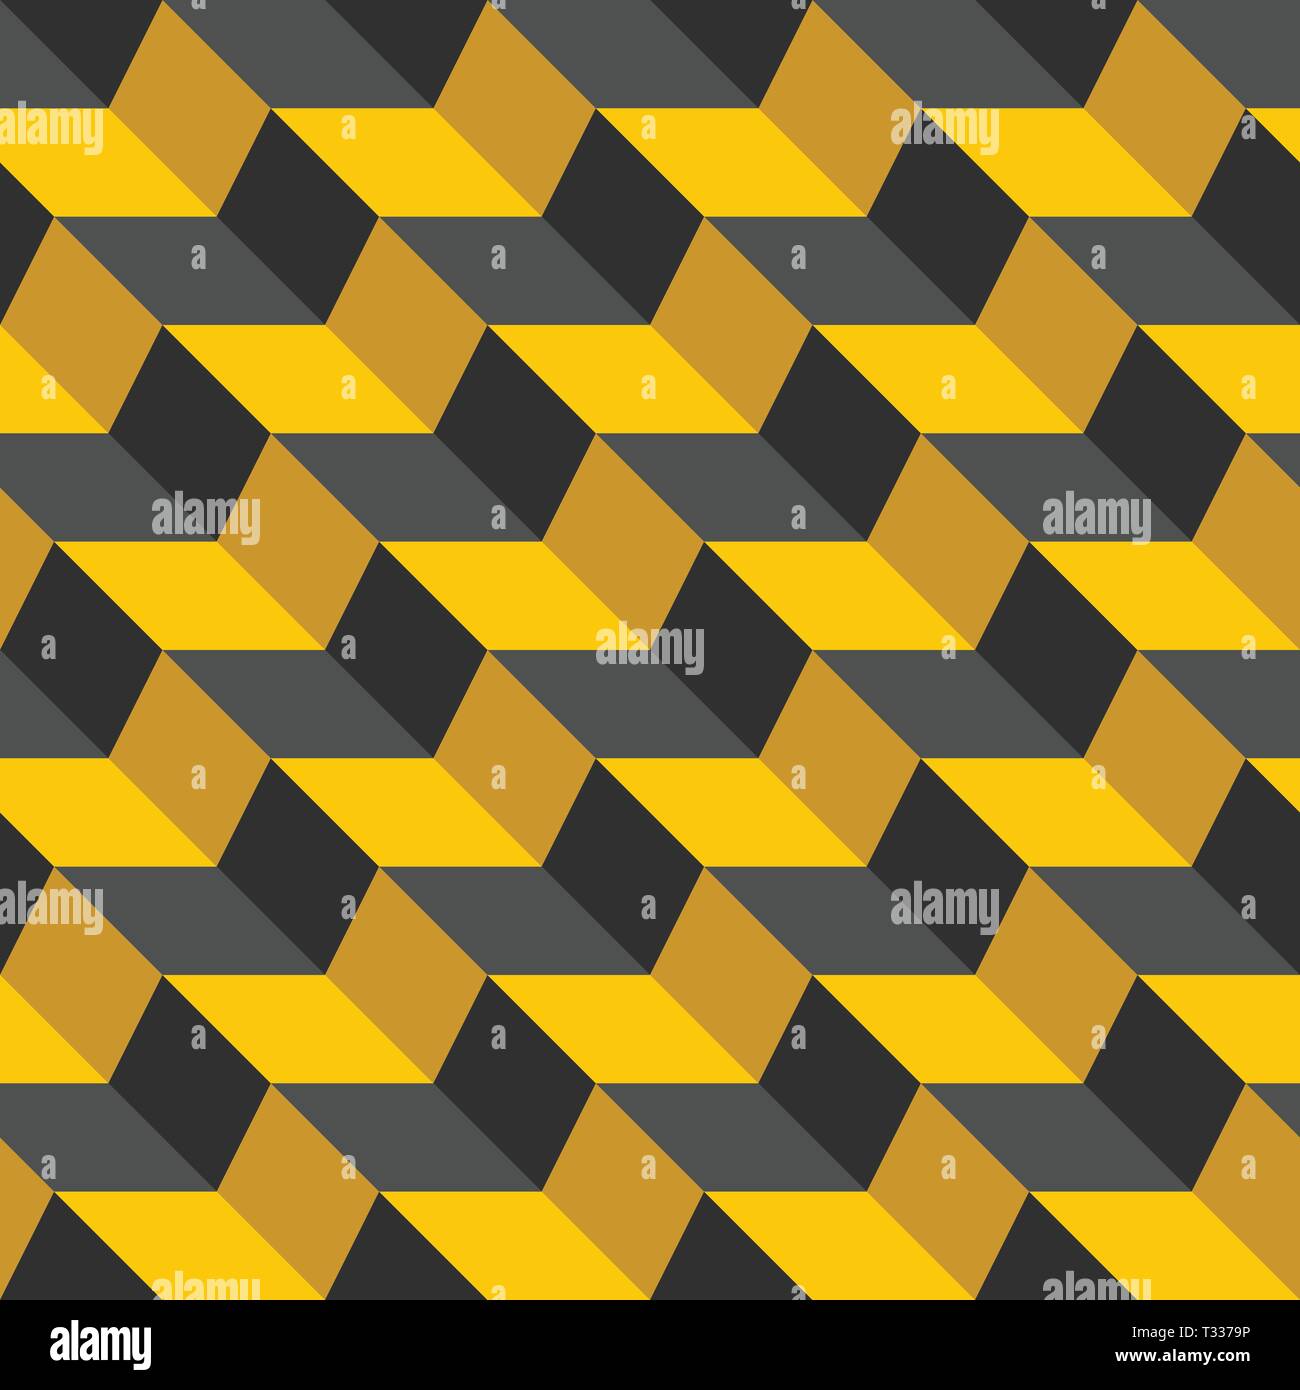 Abstact seamless pattern. Zig-zag line and dot texture. Diagonal